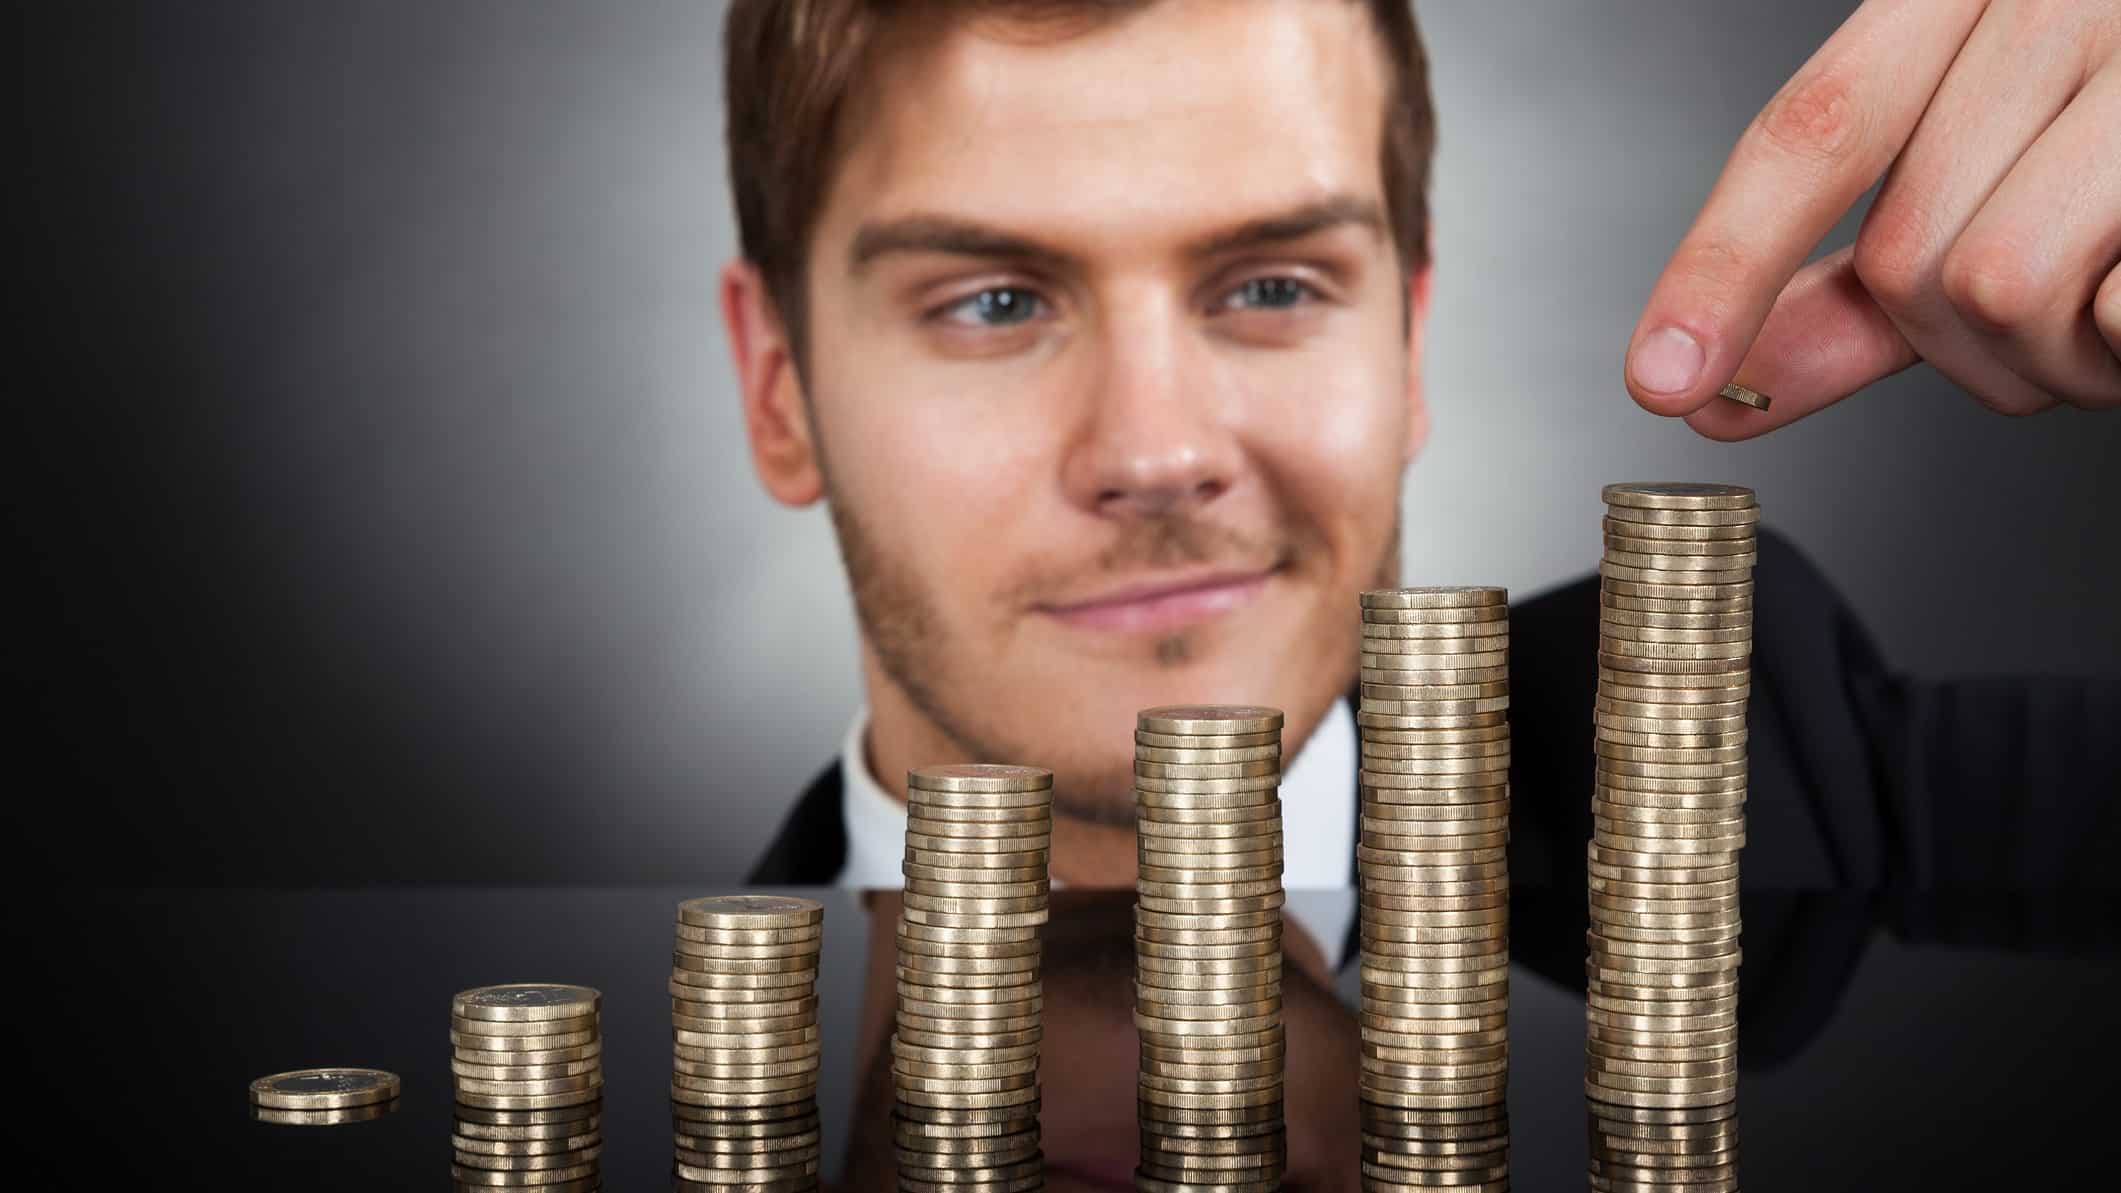 a man with a wry smile is behind ascending piles of coins as he places another coin on top of the tallest stack.